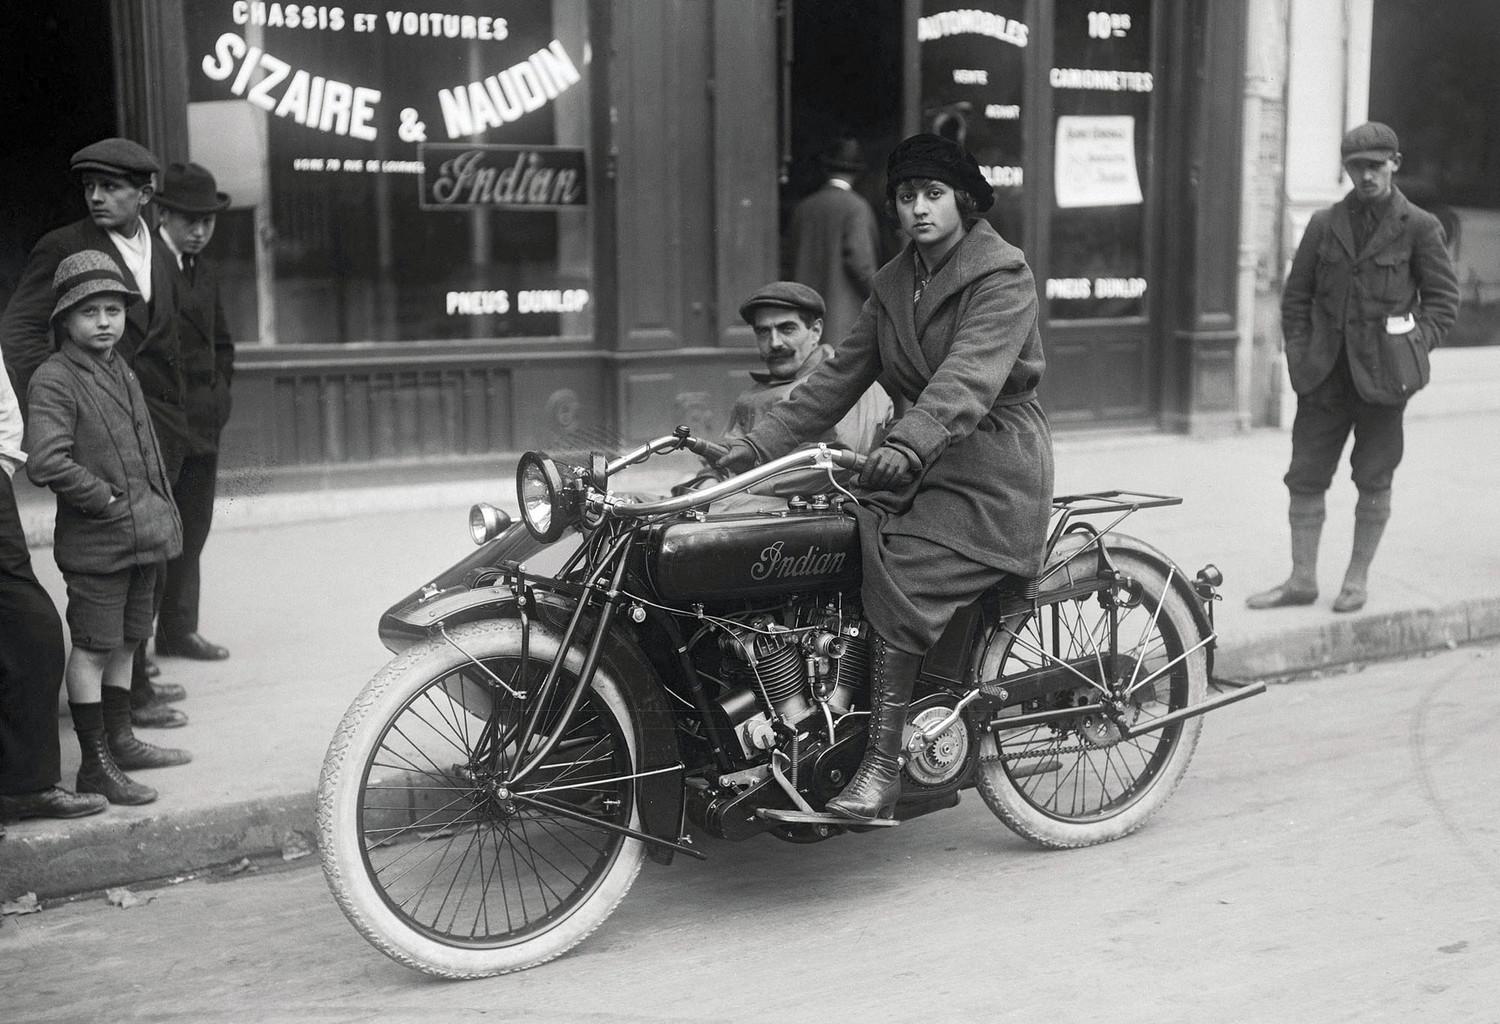 A woman poses on an Indian motorcycle with a sidecar on a street in Paris, France, in 1919.jpg